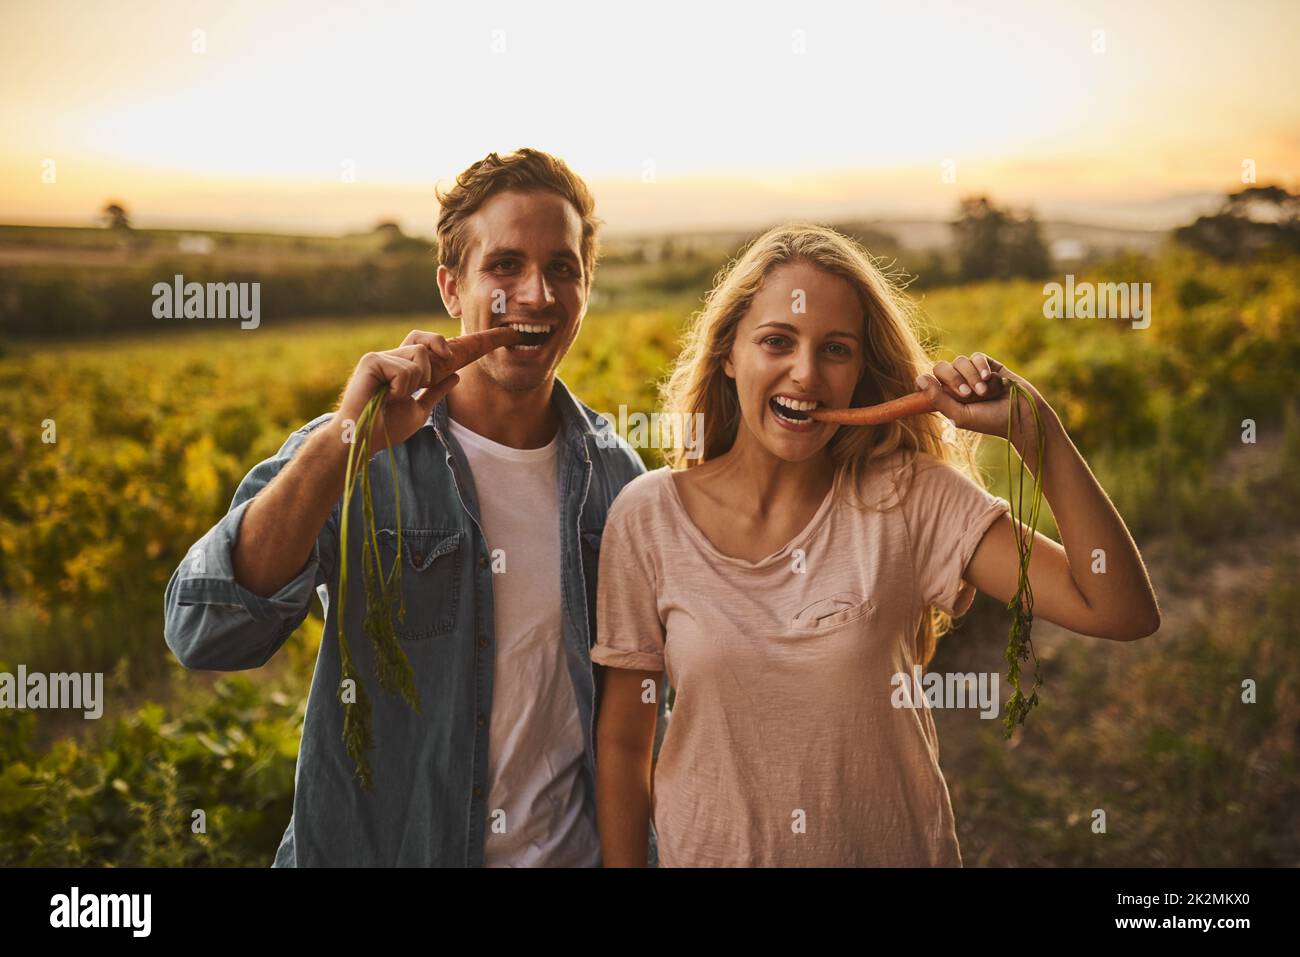 Just testing the produce. Shot of a young couple each holding up a carrot and taking a bite with their crops in the background. Stock Photo